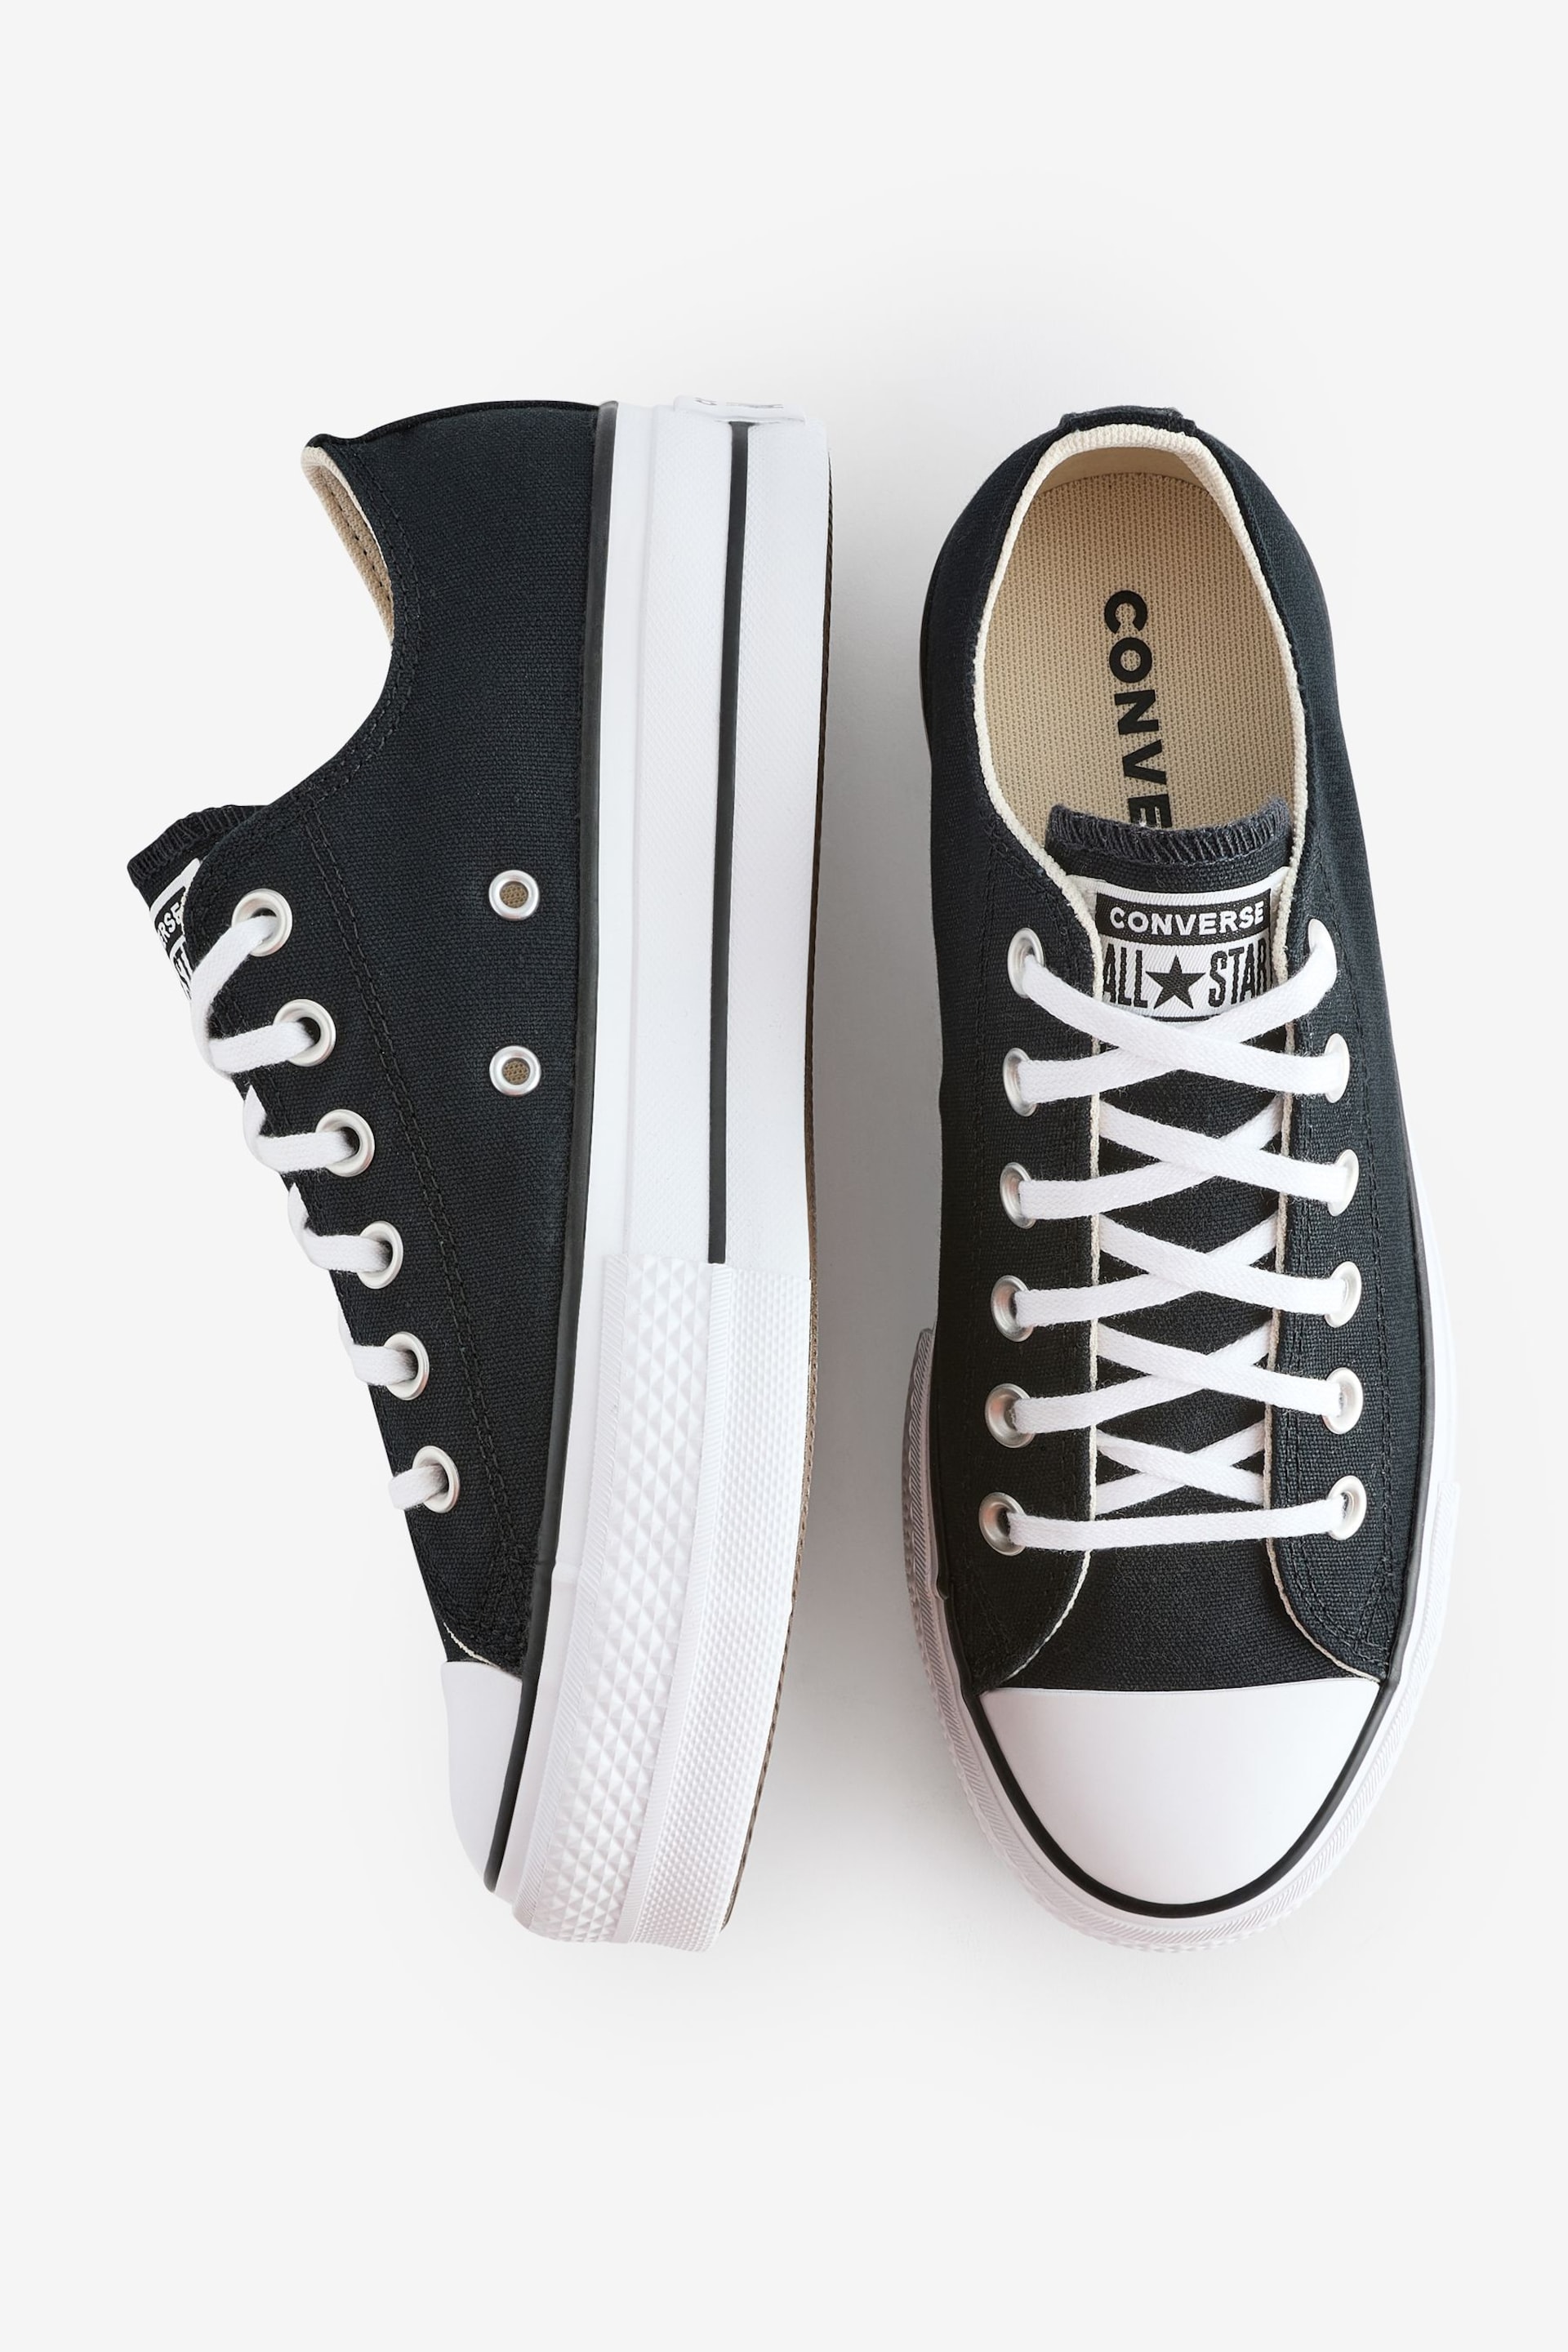 Converse Black Chuck Taylor All Star Lift Ox Trainers - Image 9 of 9